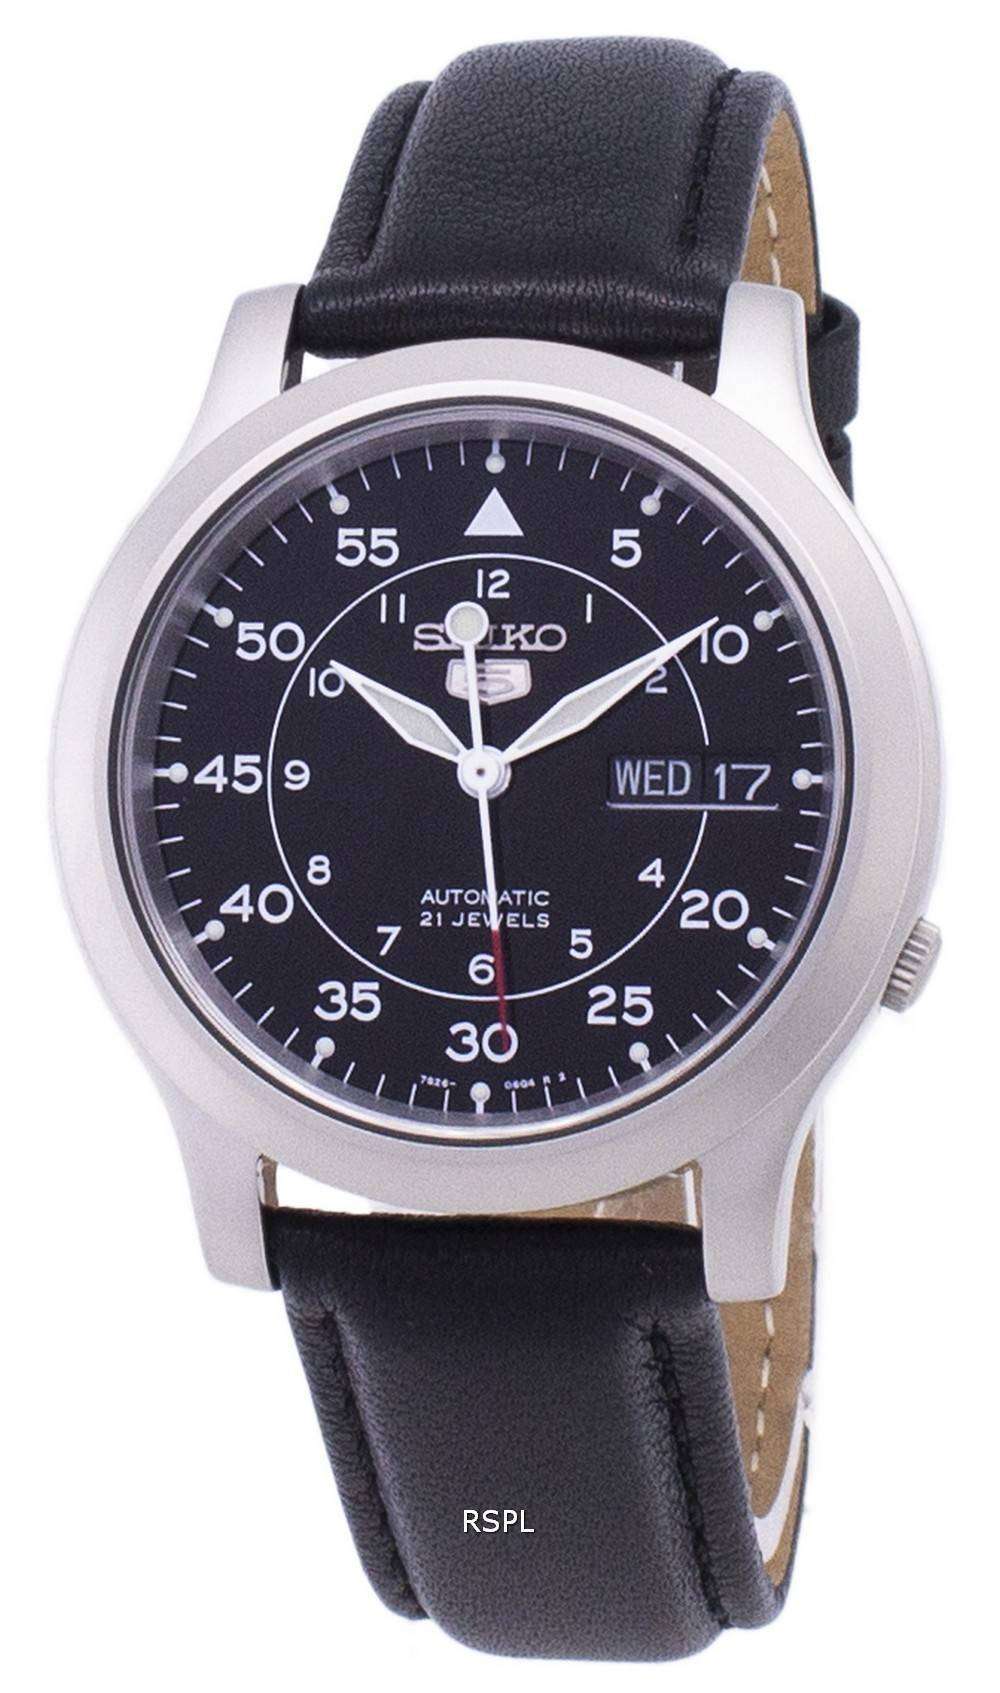 Seiko 5 Military SNK809K2-SS3 Automatic Black Leather Strap Men's Watch -  